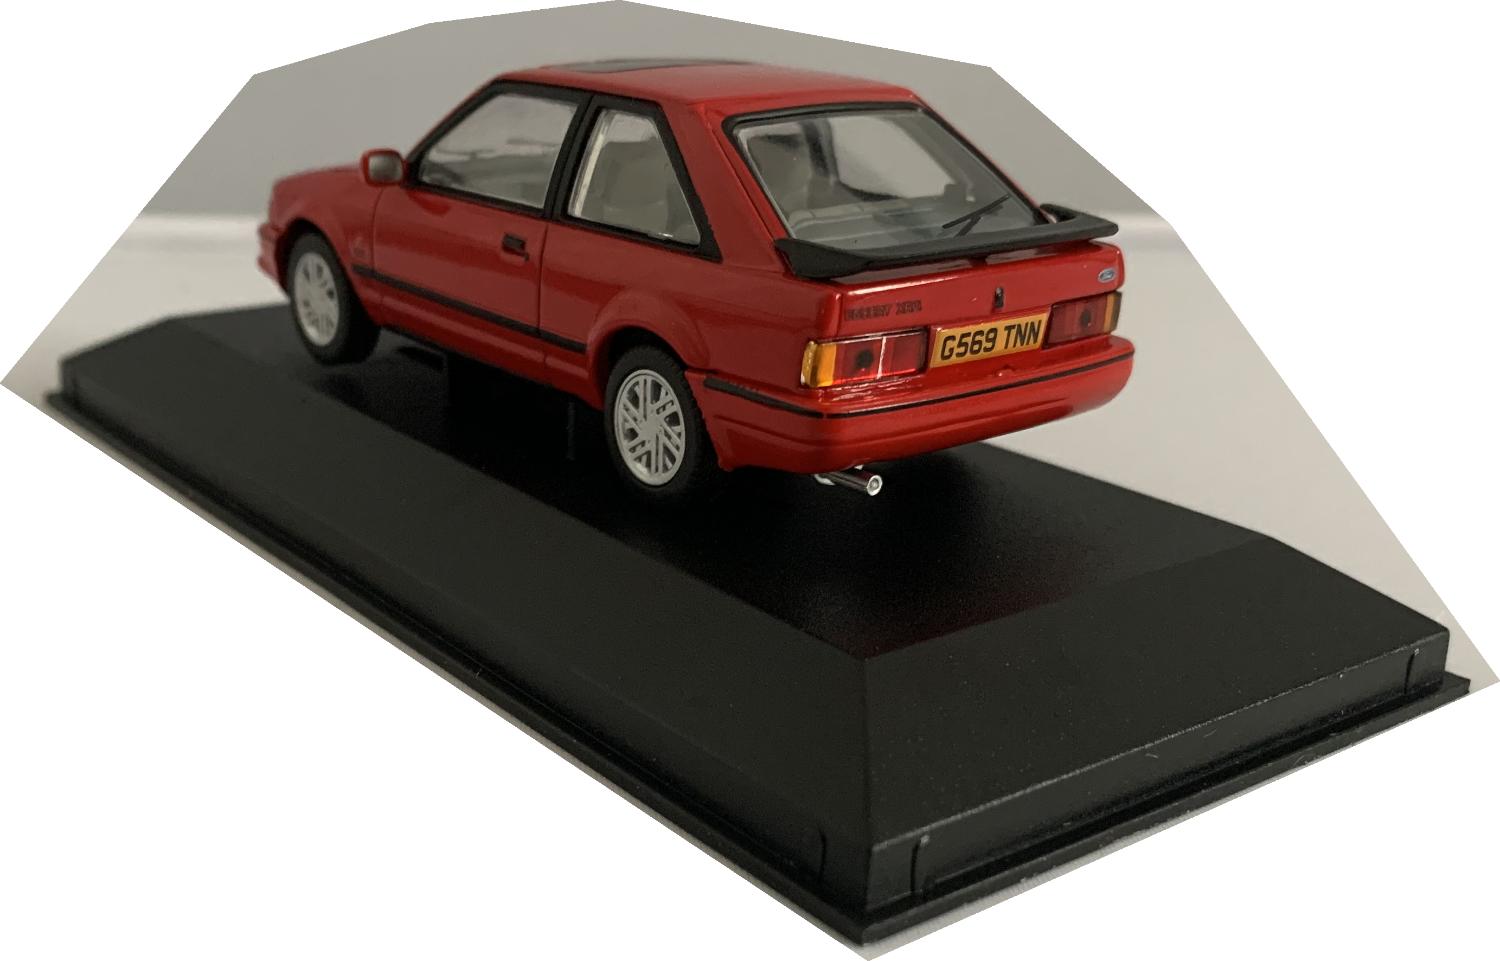 An excellent scale model of the Ford Escort,One of a Limited Edition of 1,400 pieces and includes a Limited Edition Collector Card. Model presented in Corgi Vanguards packaging